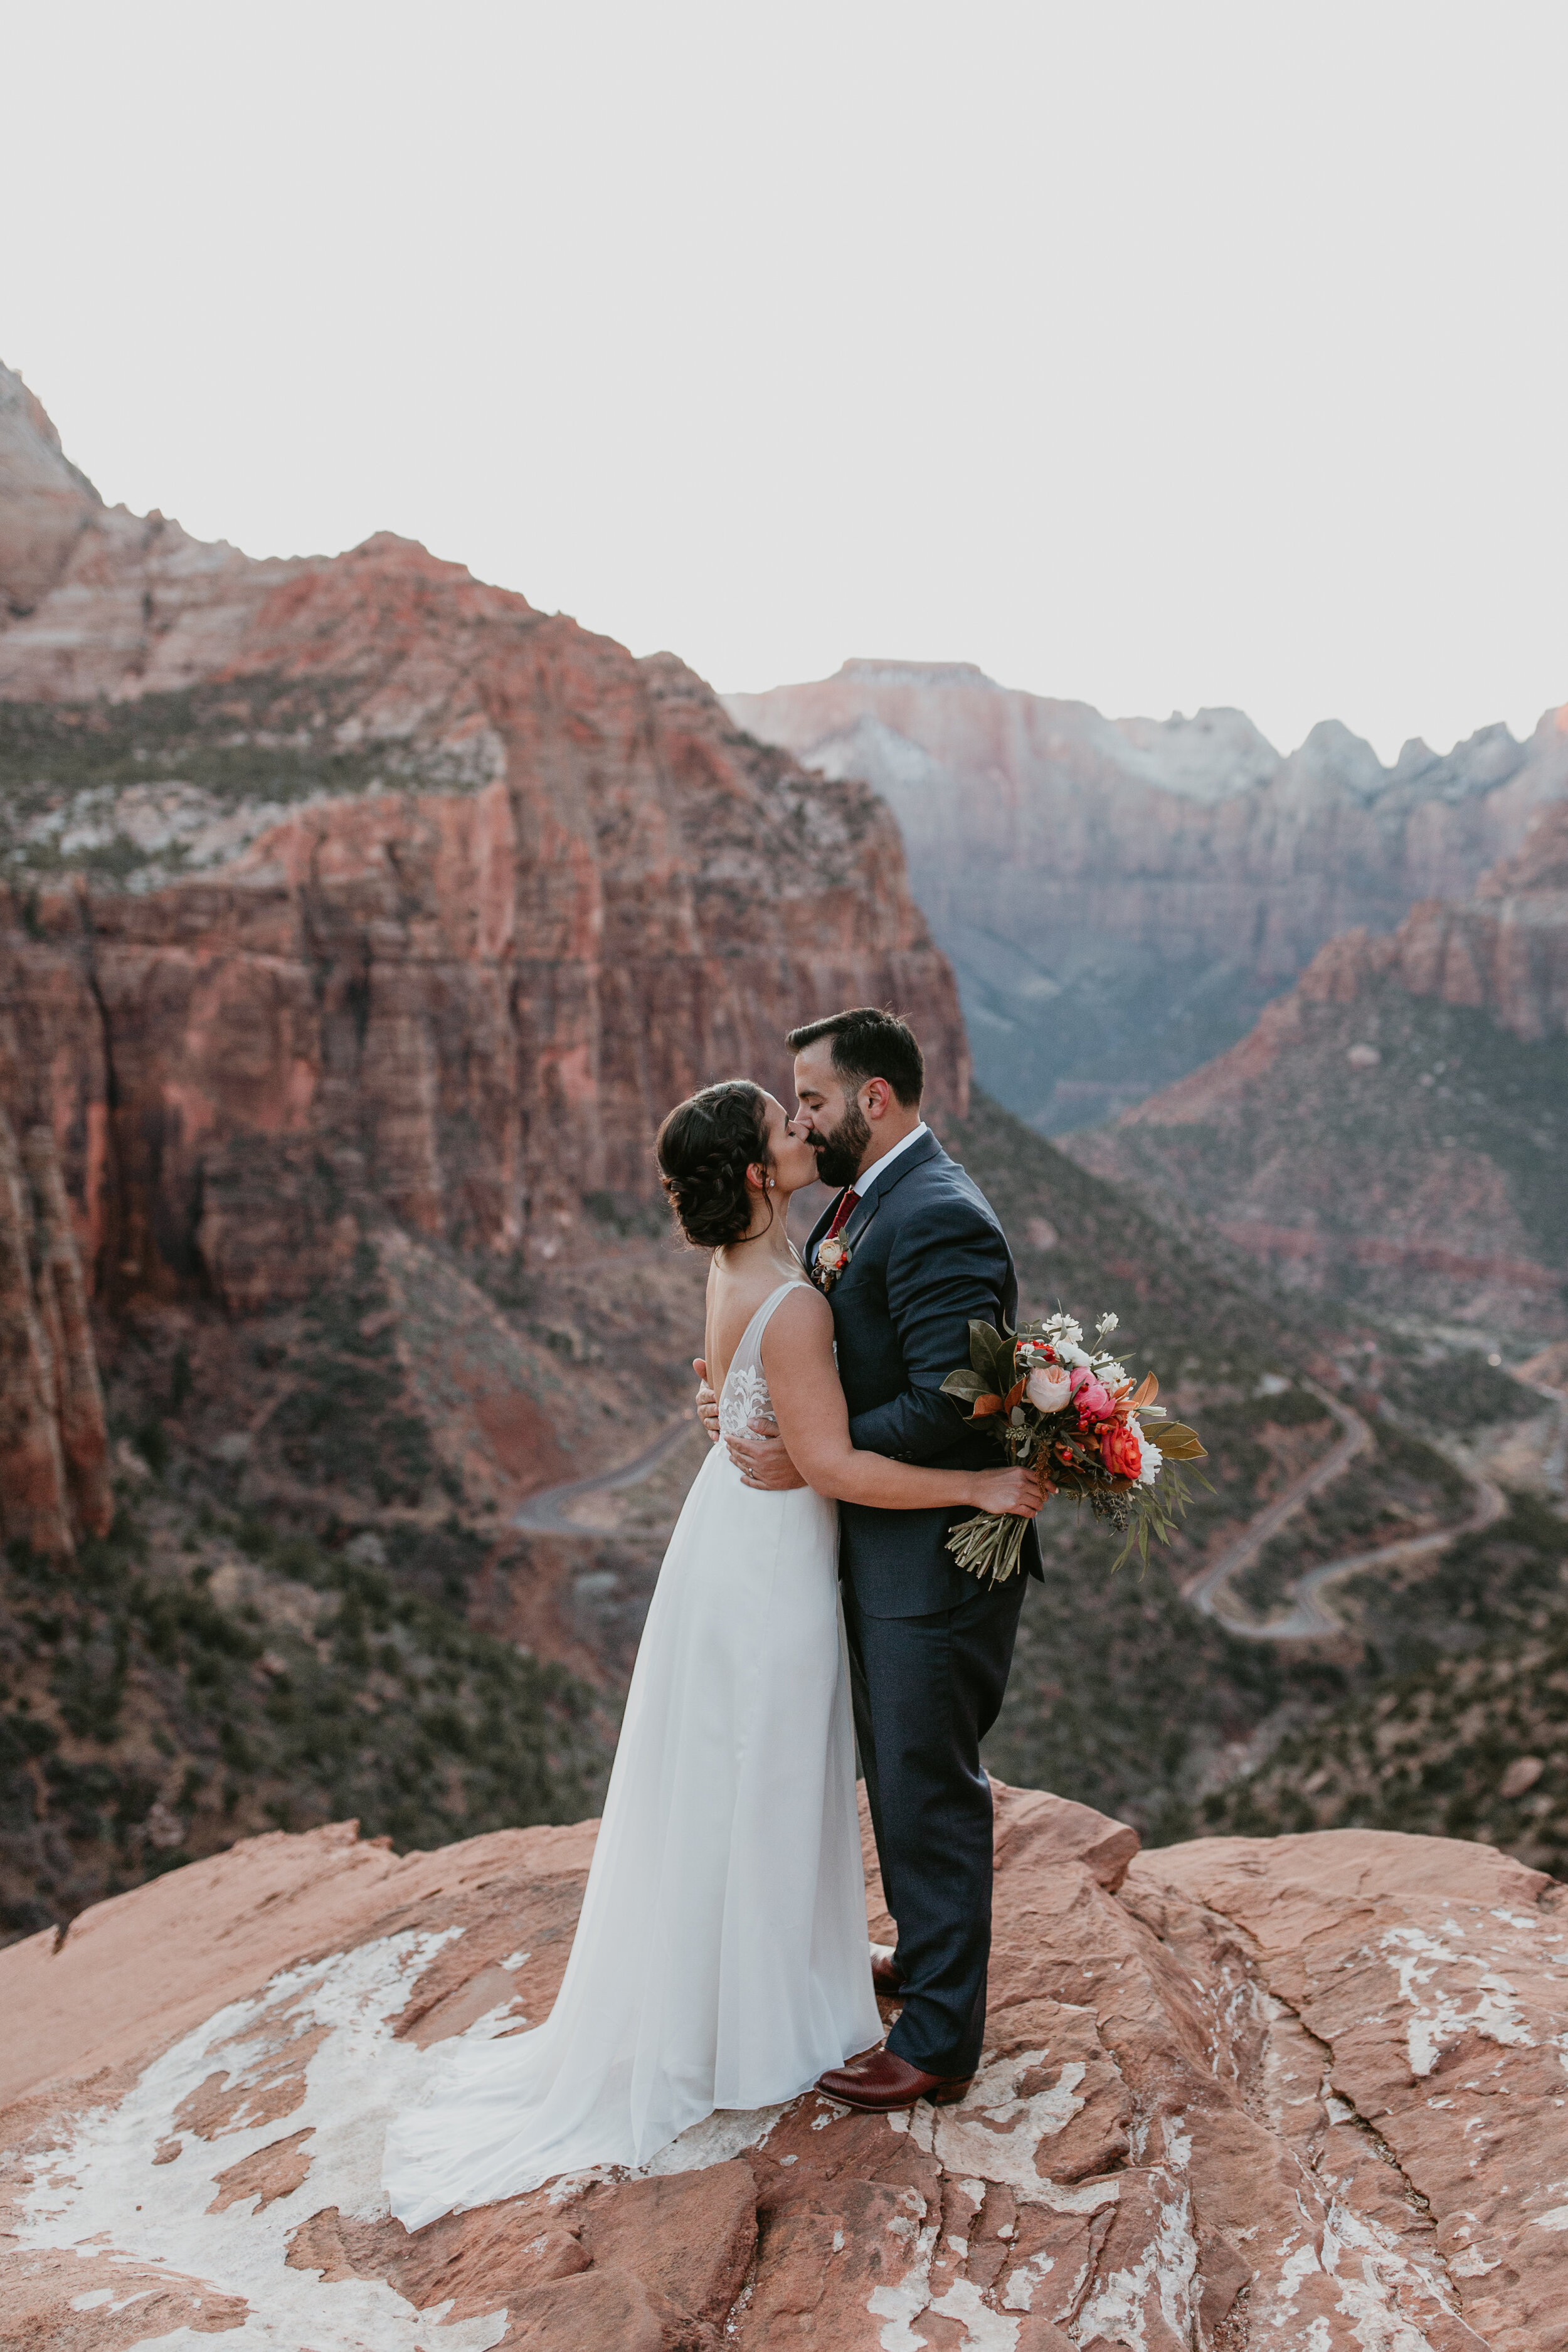 Nicole-Daacke-Photography-snowy-hiking-elopement-in-zion-national-park-zion-elopement-photographer-canyon-overlook-trial-brial-portraits-in-mt-zion-national-park-utah-desert-adventure-elopement-photographer-151.jpg